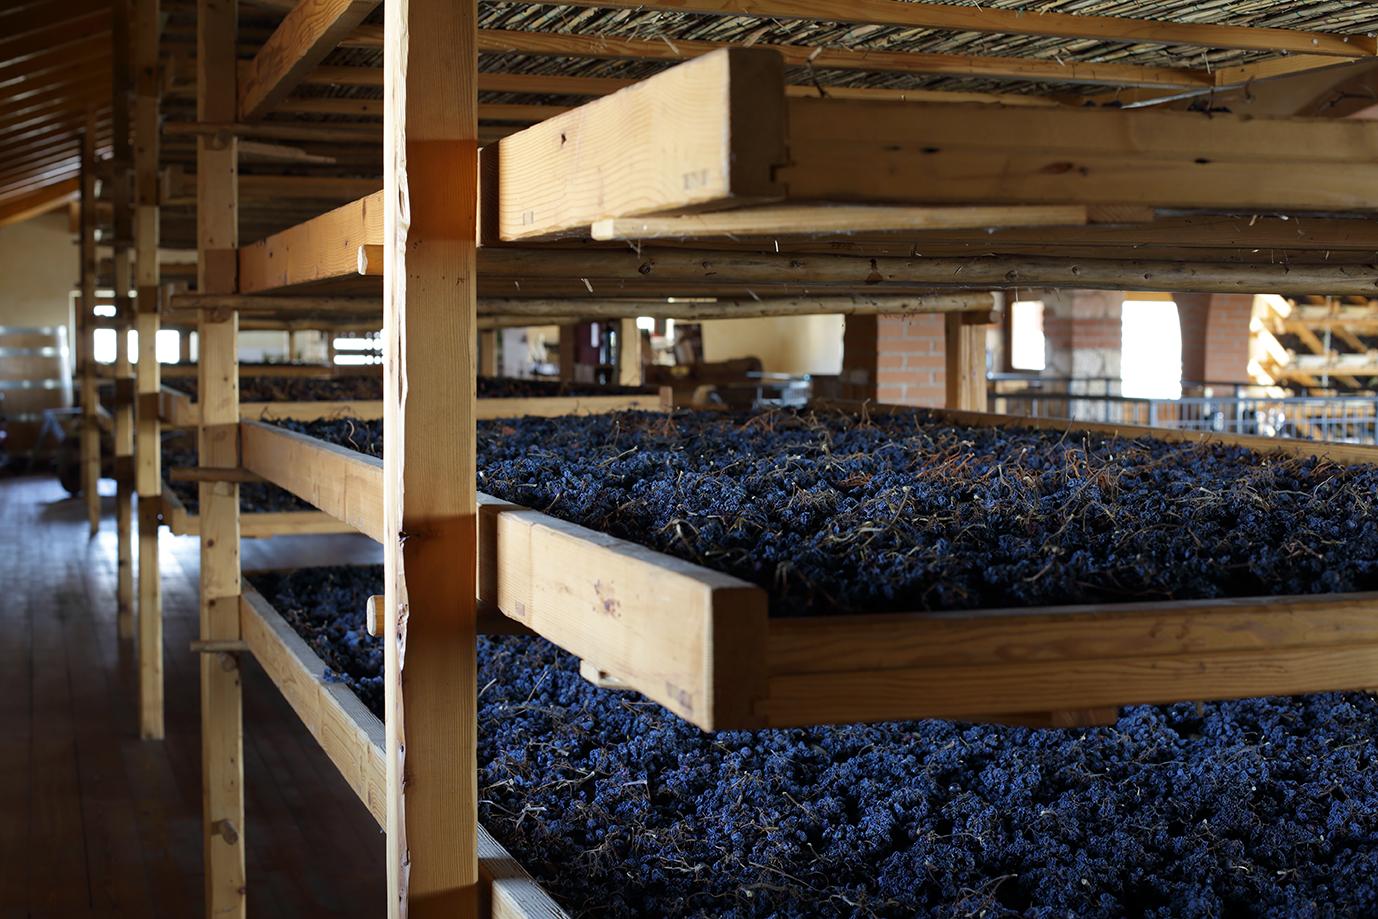 Costa Arènte grapes drying